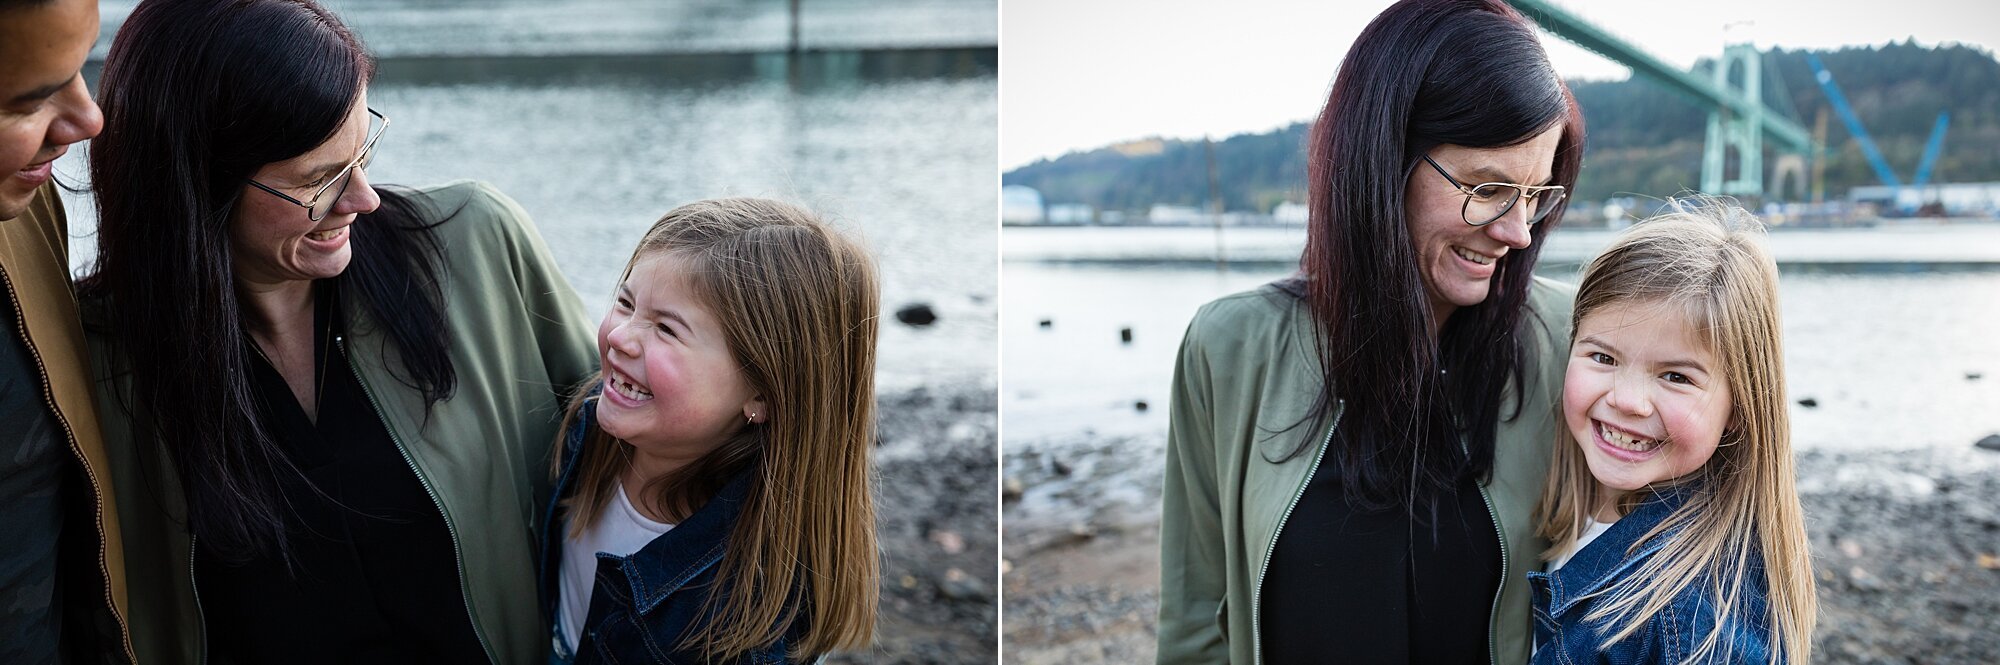 Cathedral_Park_Waterfront_Family_Session_Hunnicutt_Photography_Portland_Oregon_0020.jpg